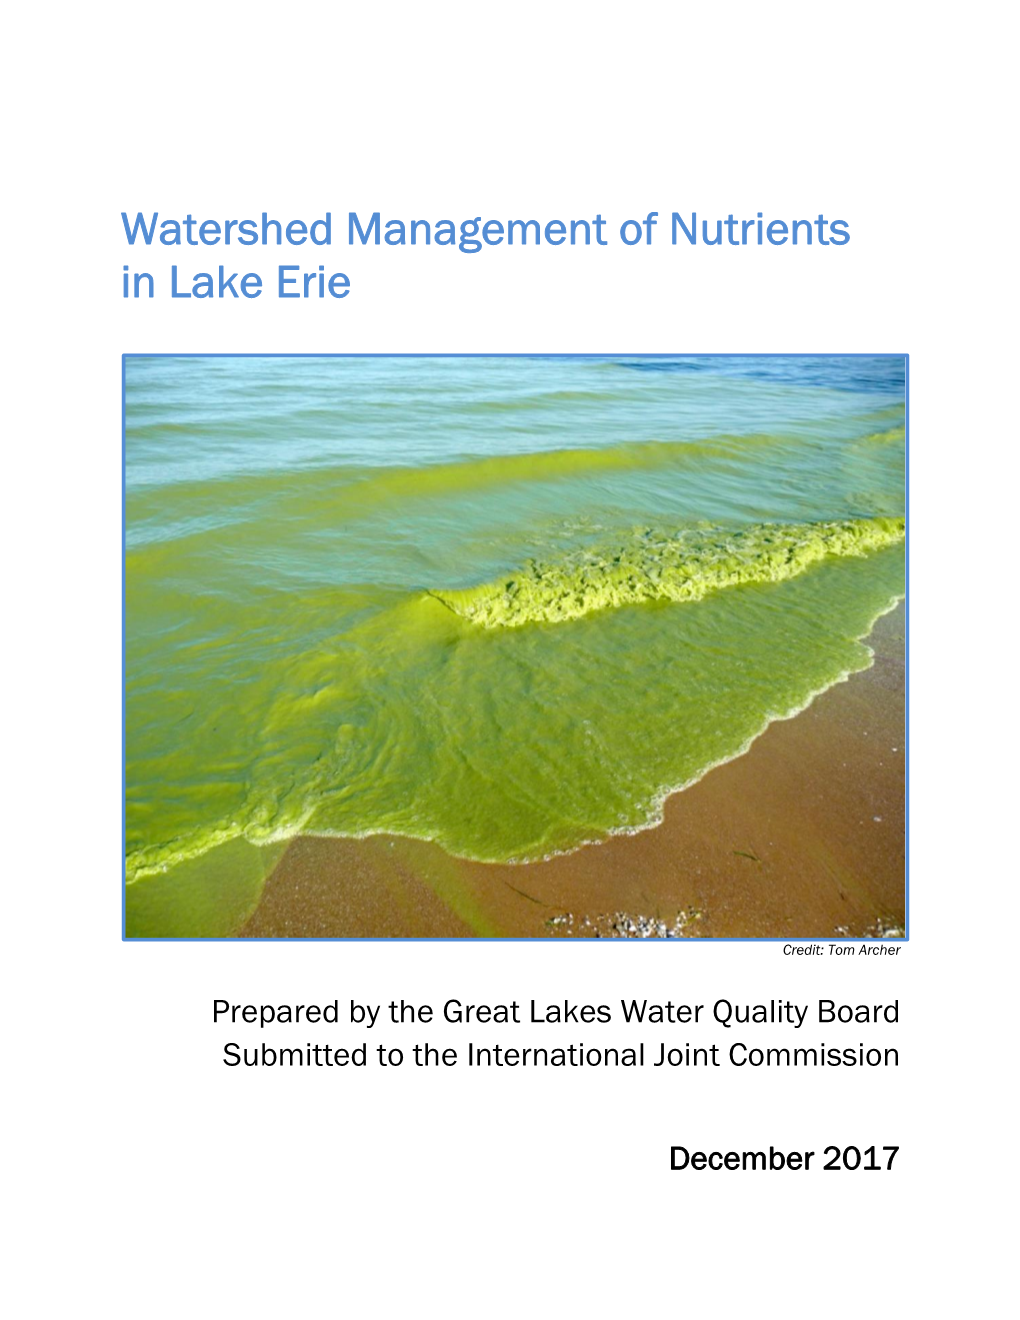 Watershed Management of Nutrients in Lake Erie